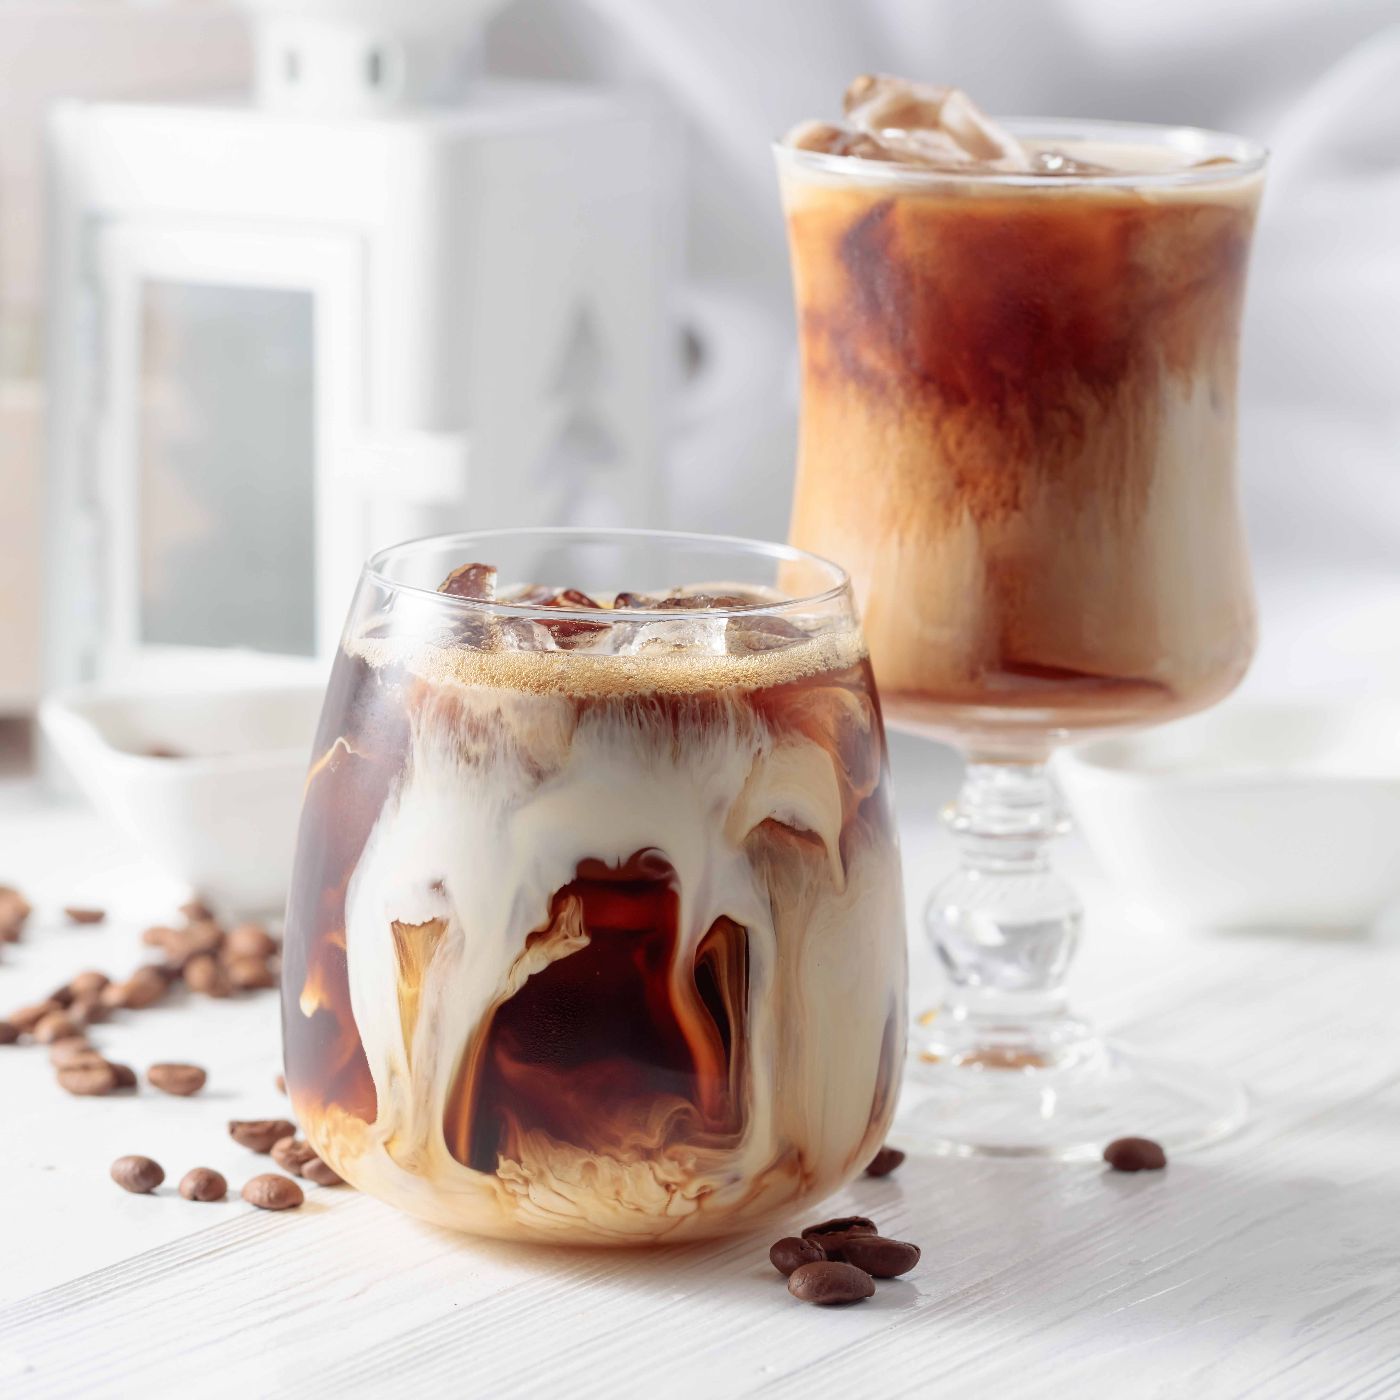 Iced-coffee-with-cream-and-natural-ice.-1367483097_5773x8660_square.jpeg